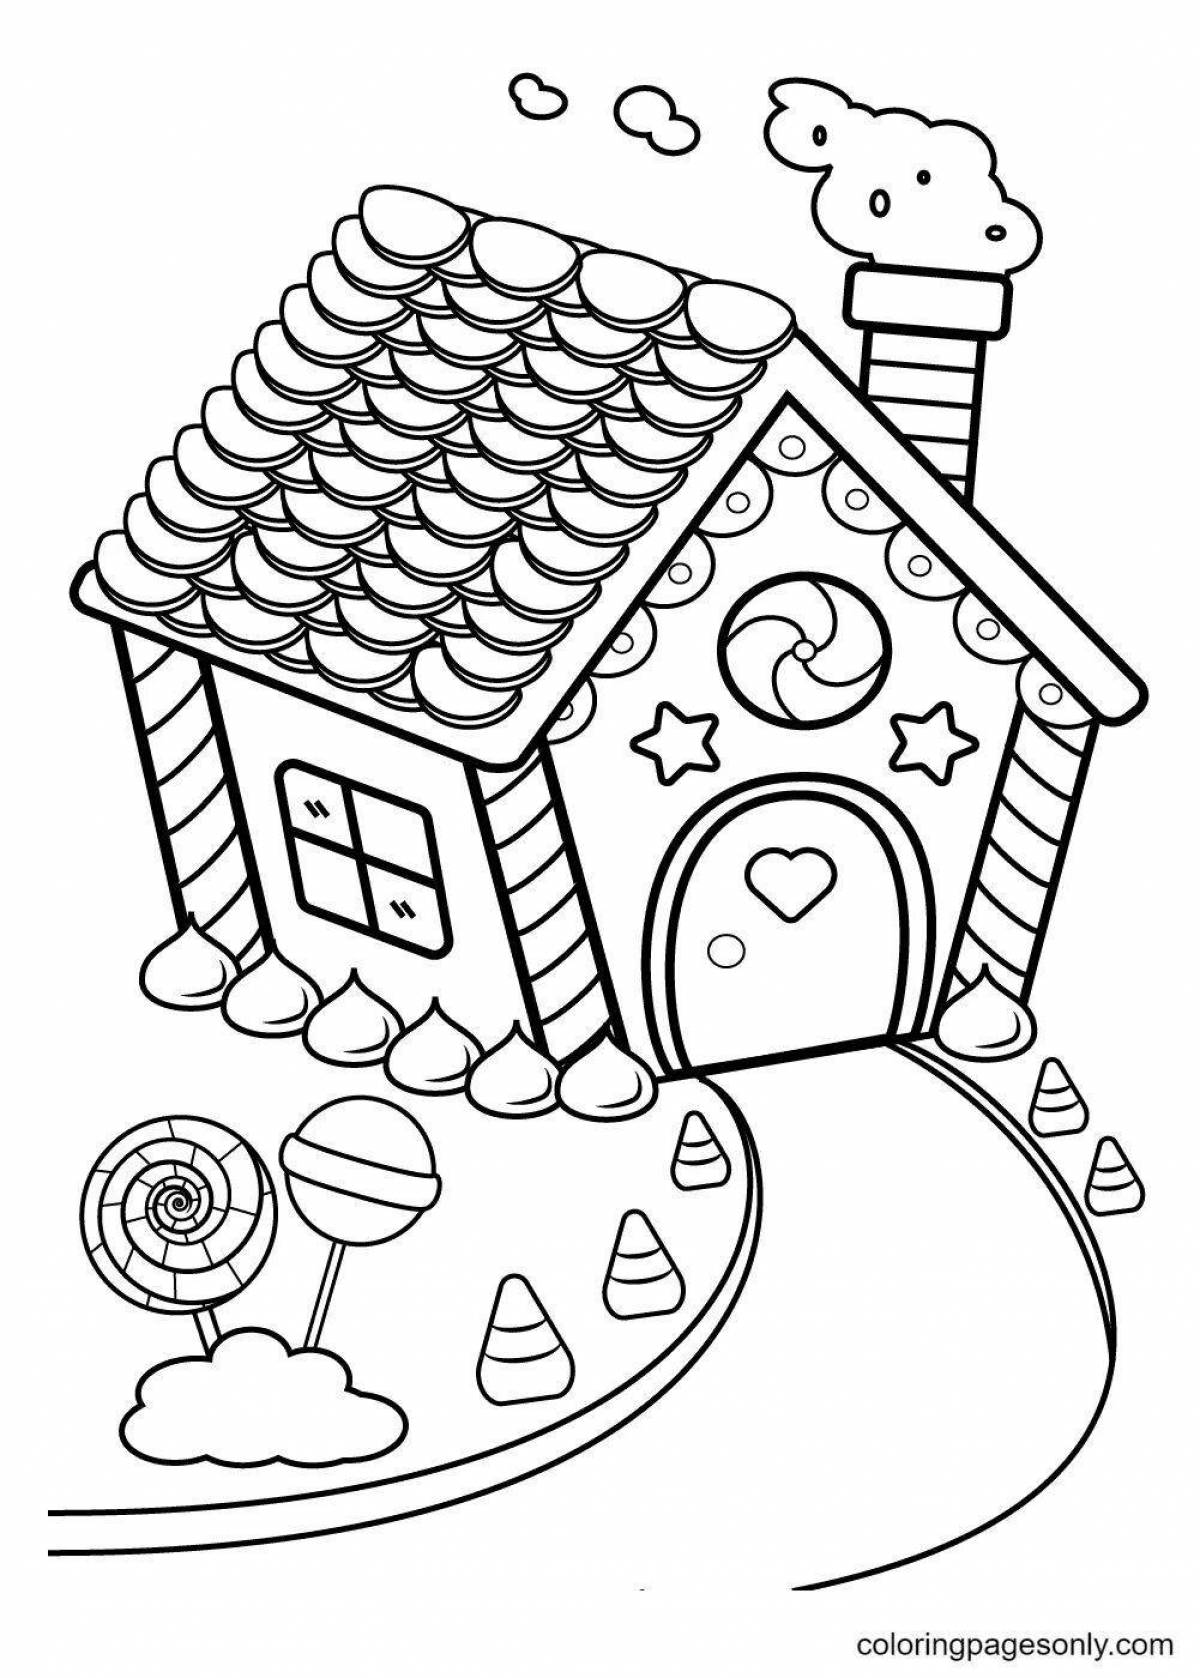 Coloring ornate house wish game price